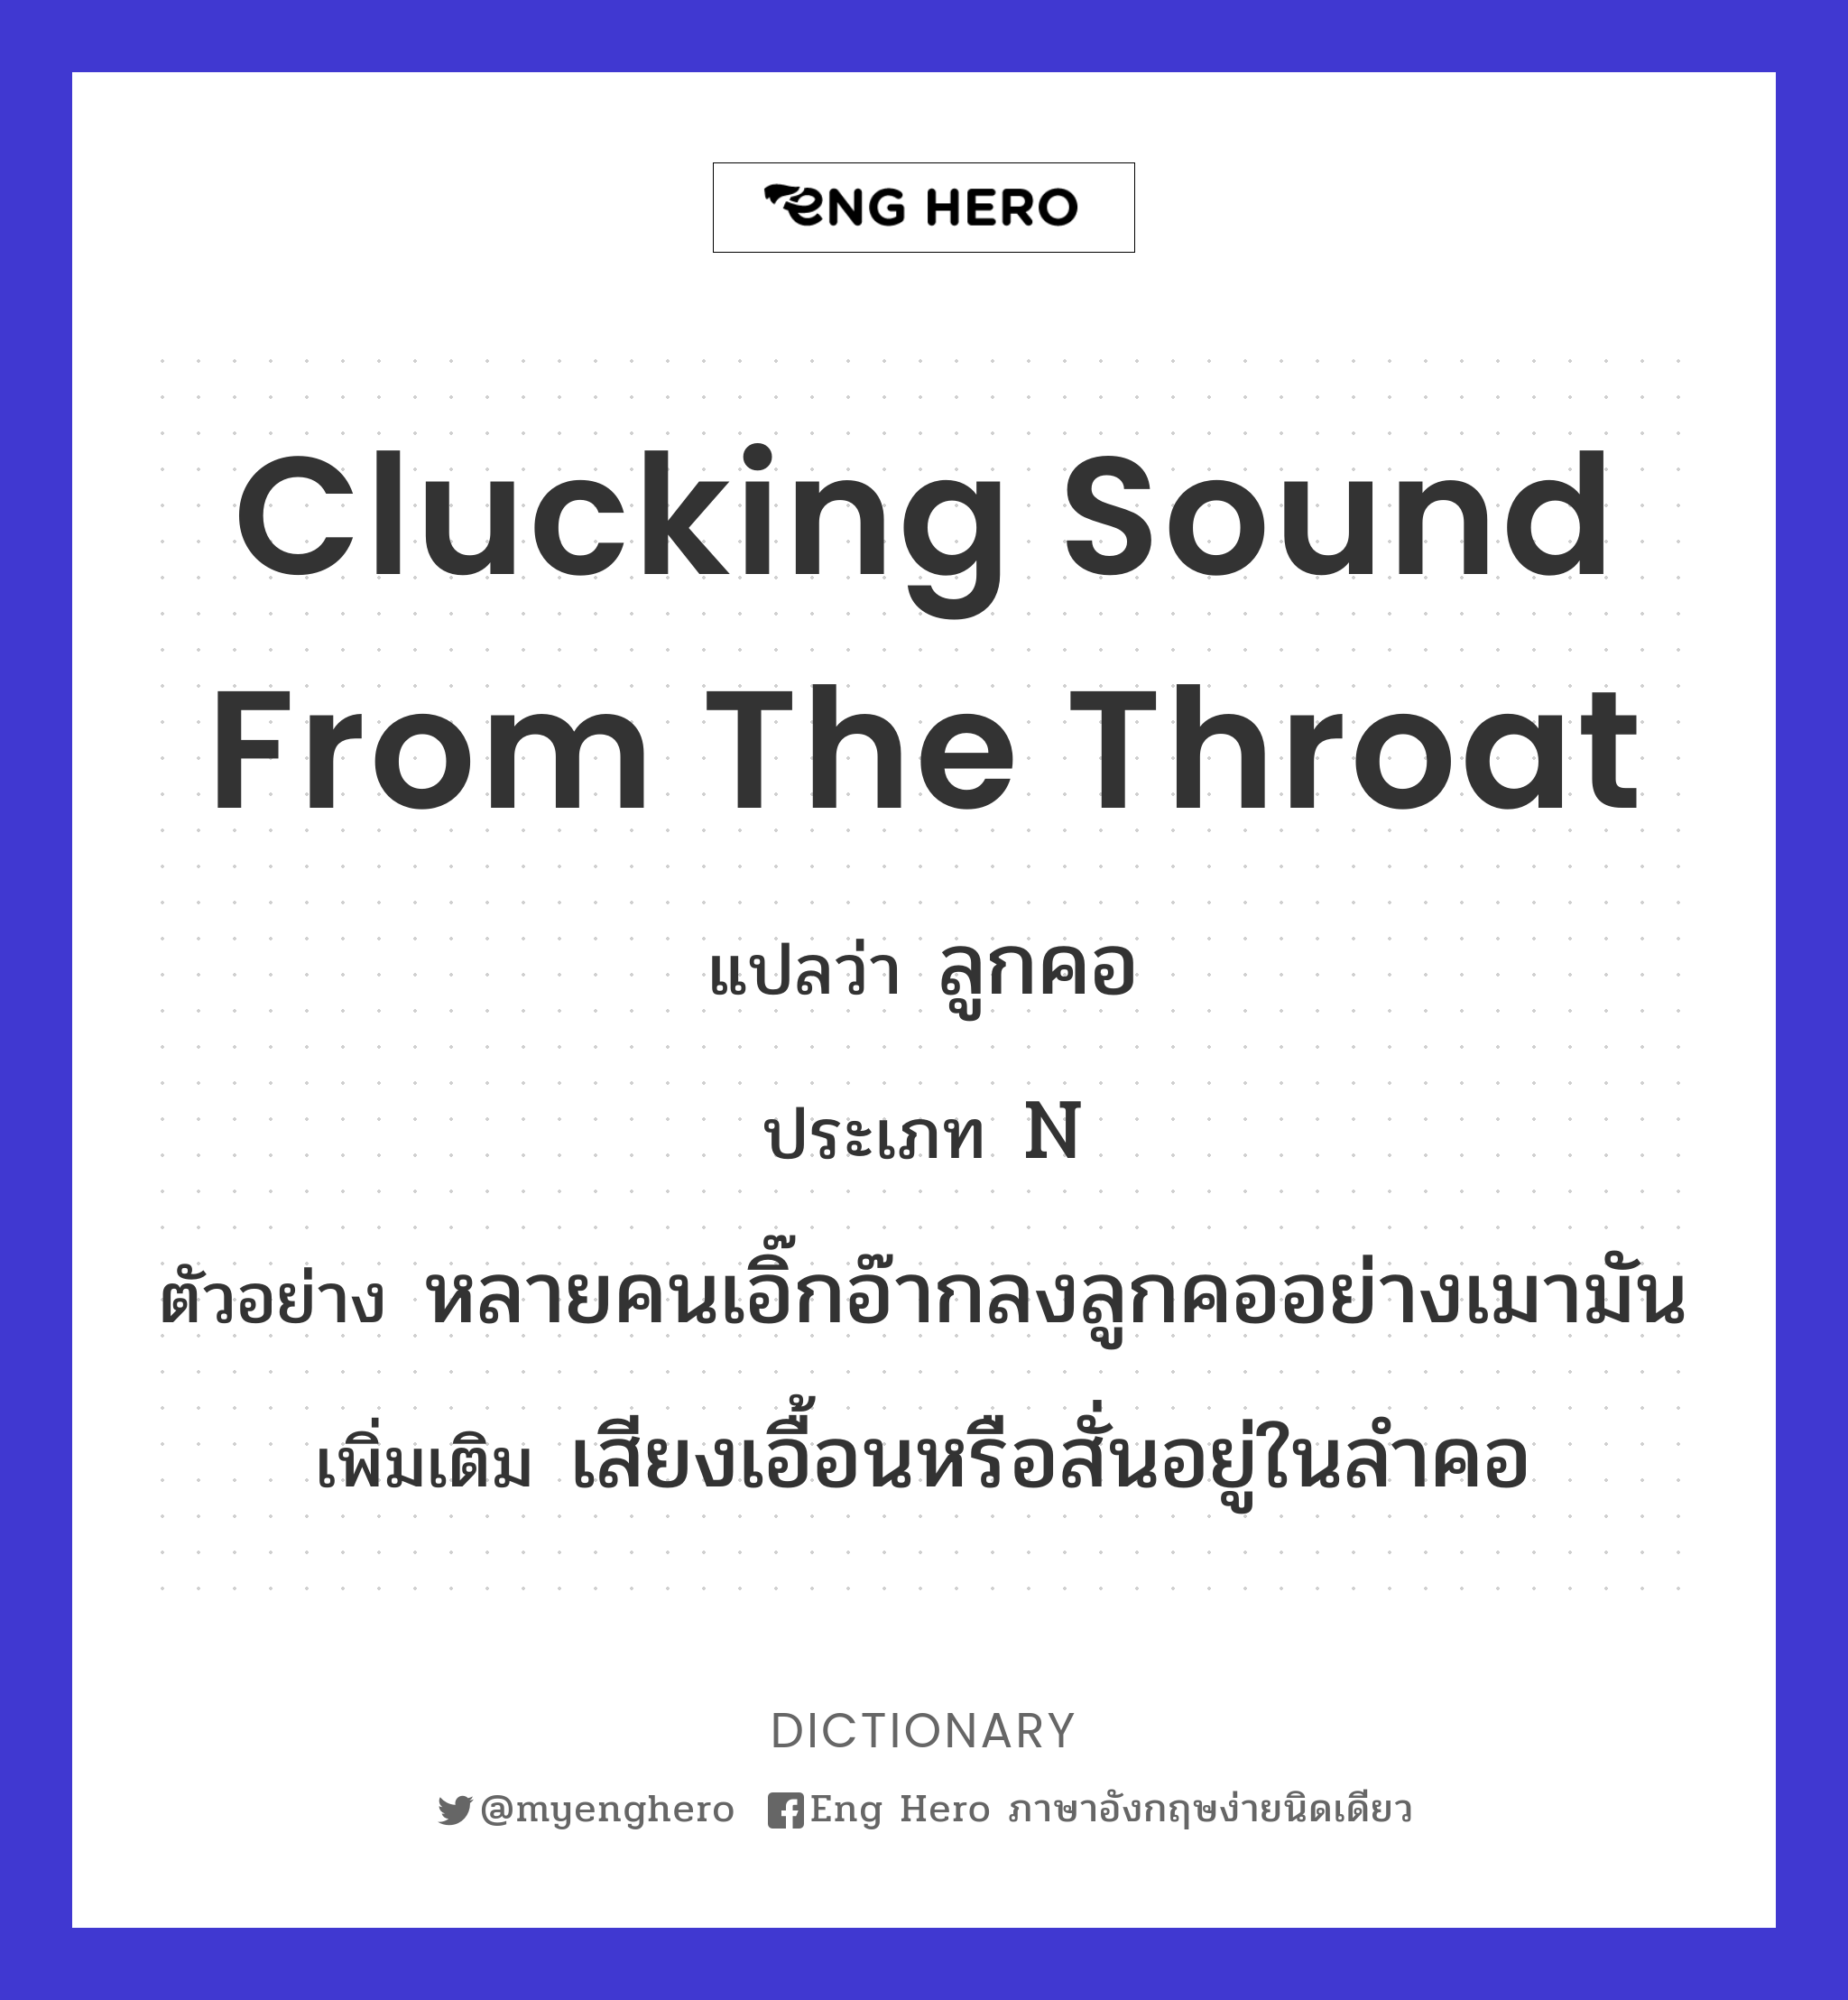 clucking sound from the throat